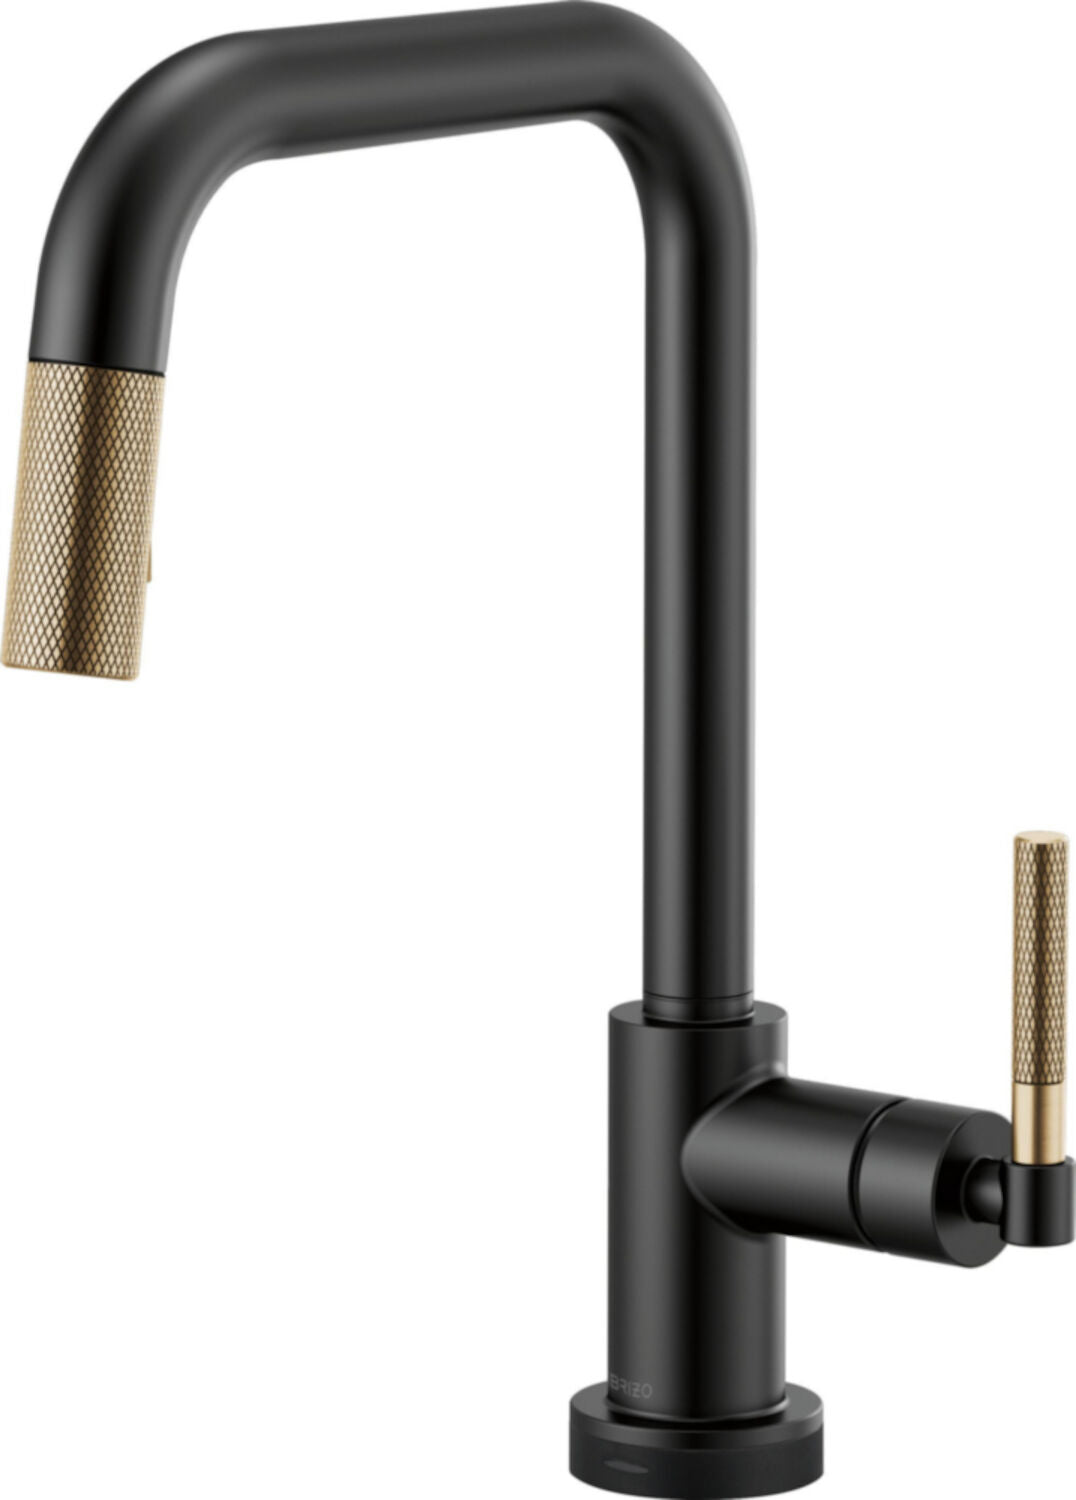 LITZE SMARTTOUCH® PULL-DOWN FAUCET WITH SQUARE SPOUT AND KNURLED HANDLE